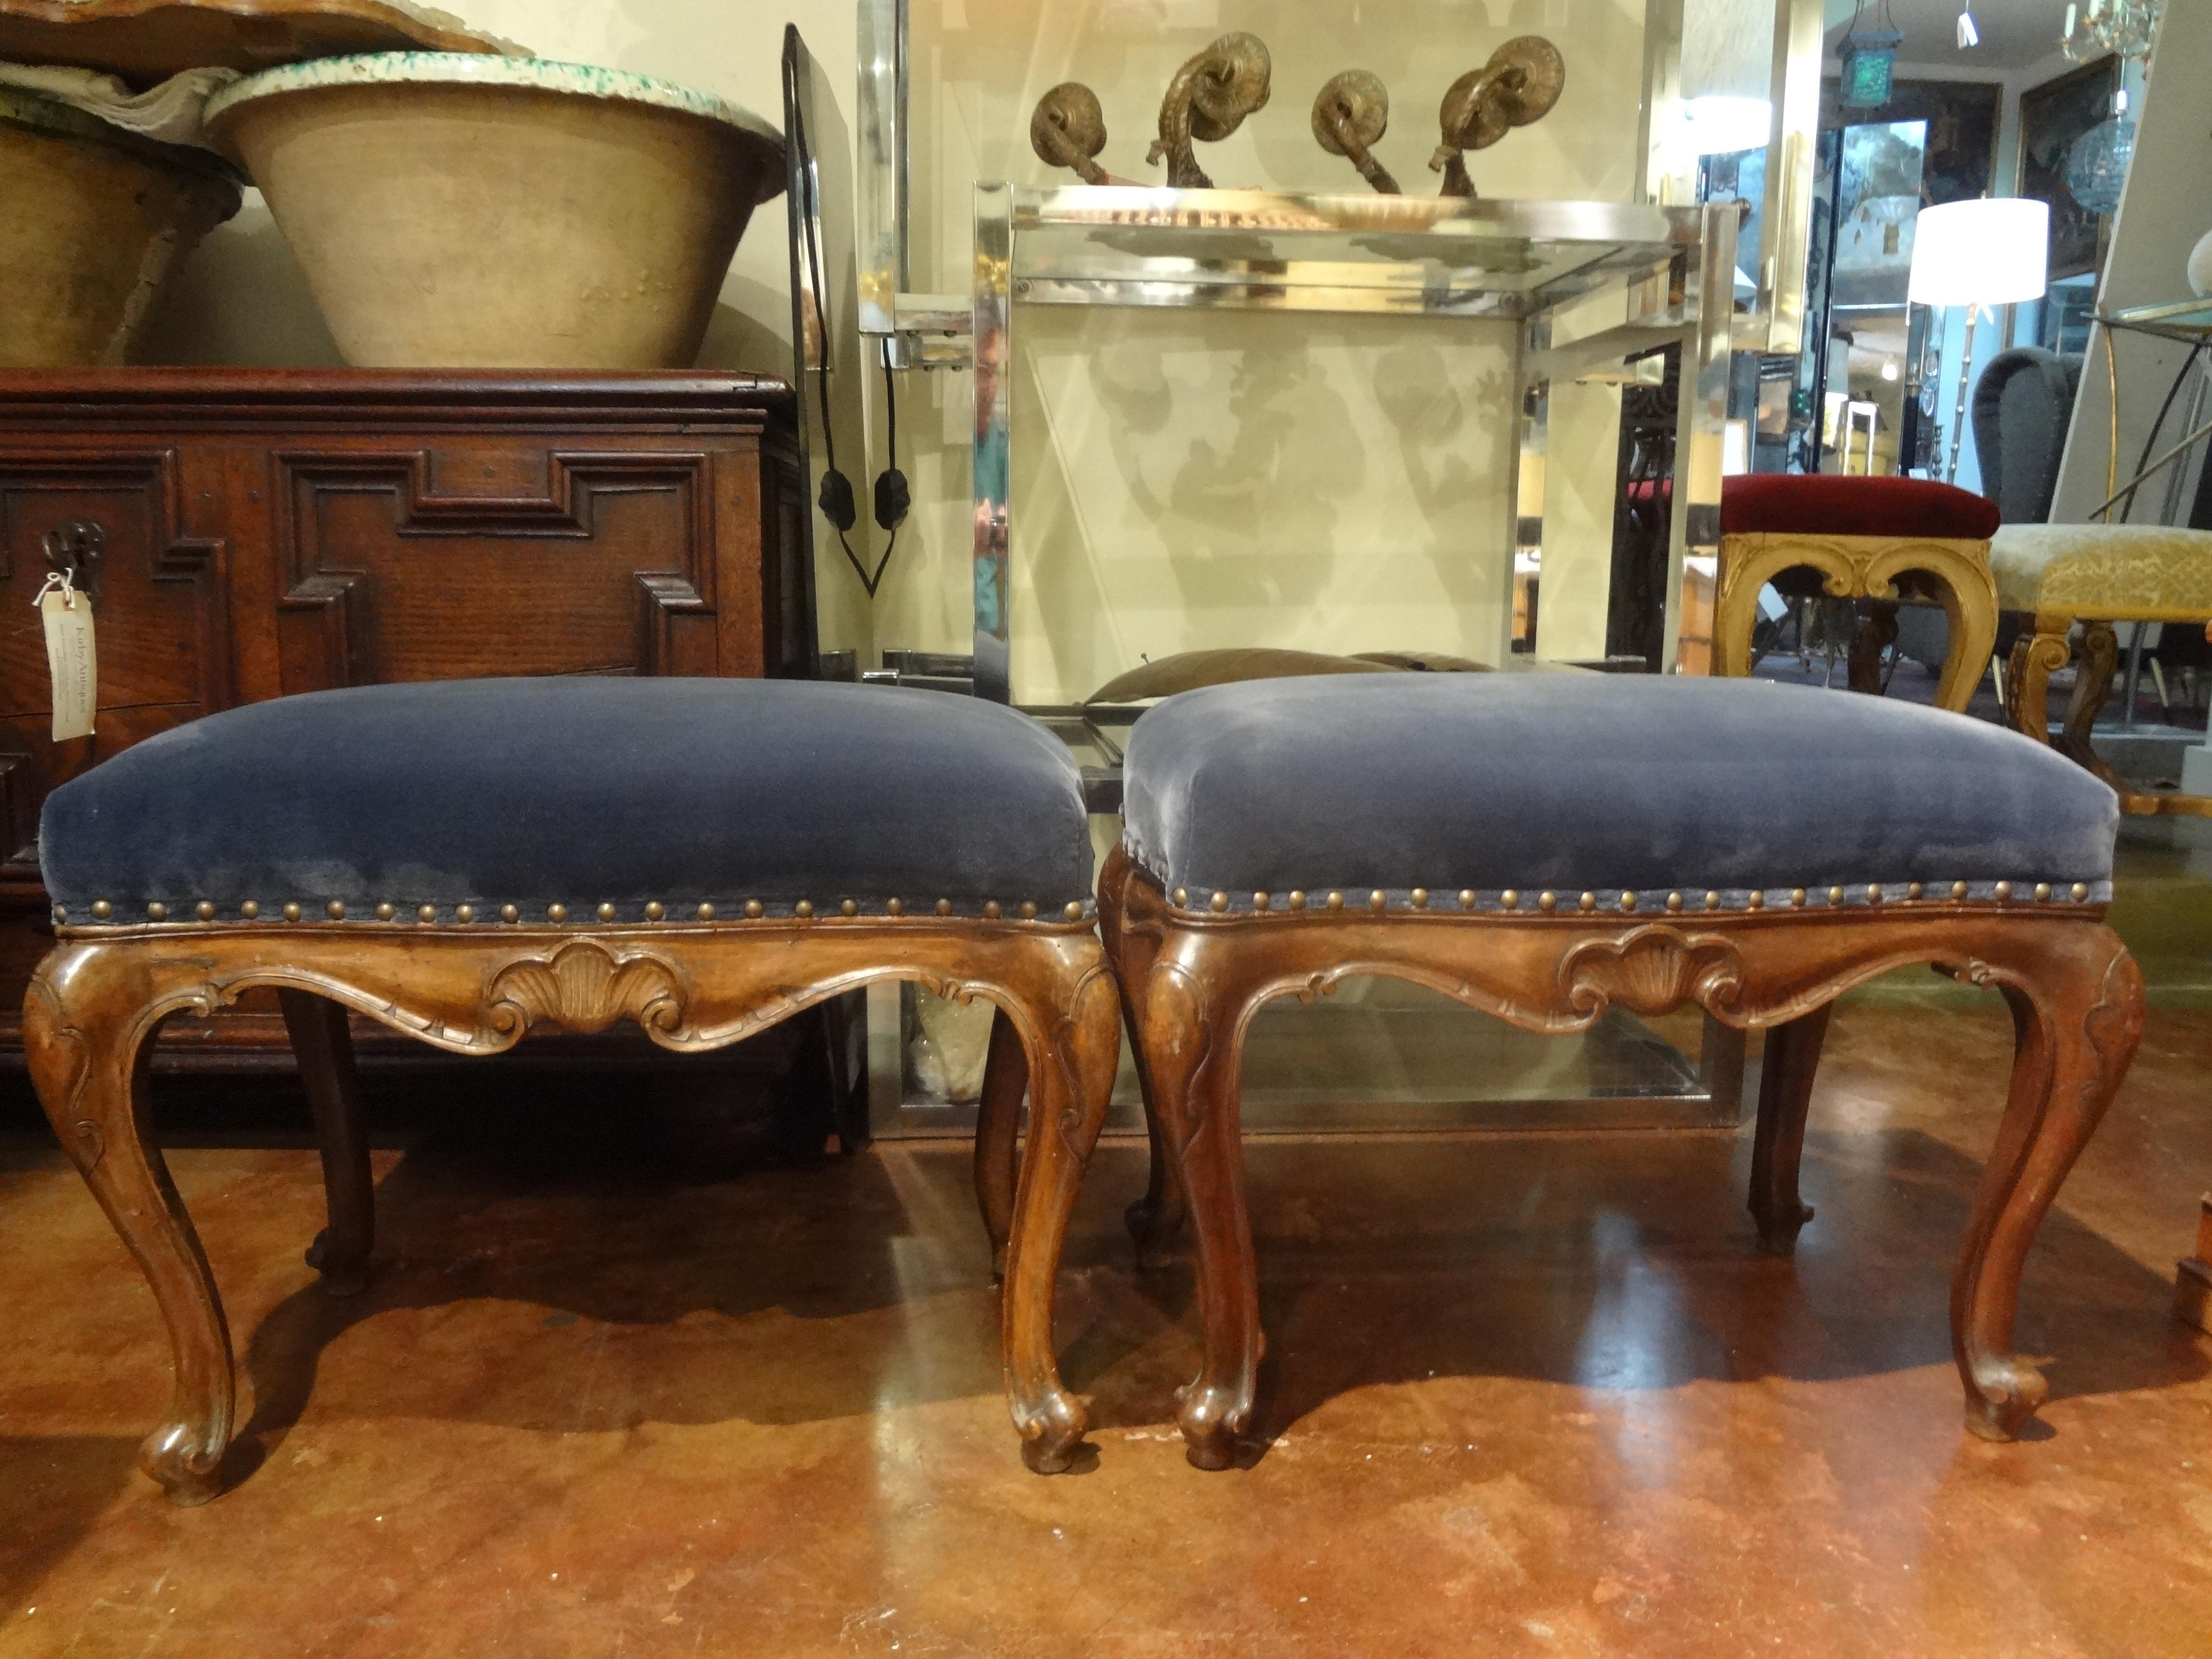 Fantastic pair of antique Italian Regence style walnut benches, stools or ottomans. This pair of French benches have been newly upholstered in a gorgeous shade of blue velvet with spaced nailhead detail. Form and function in this pair of usable